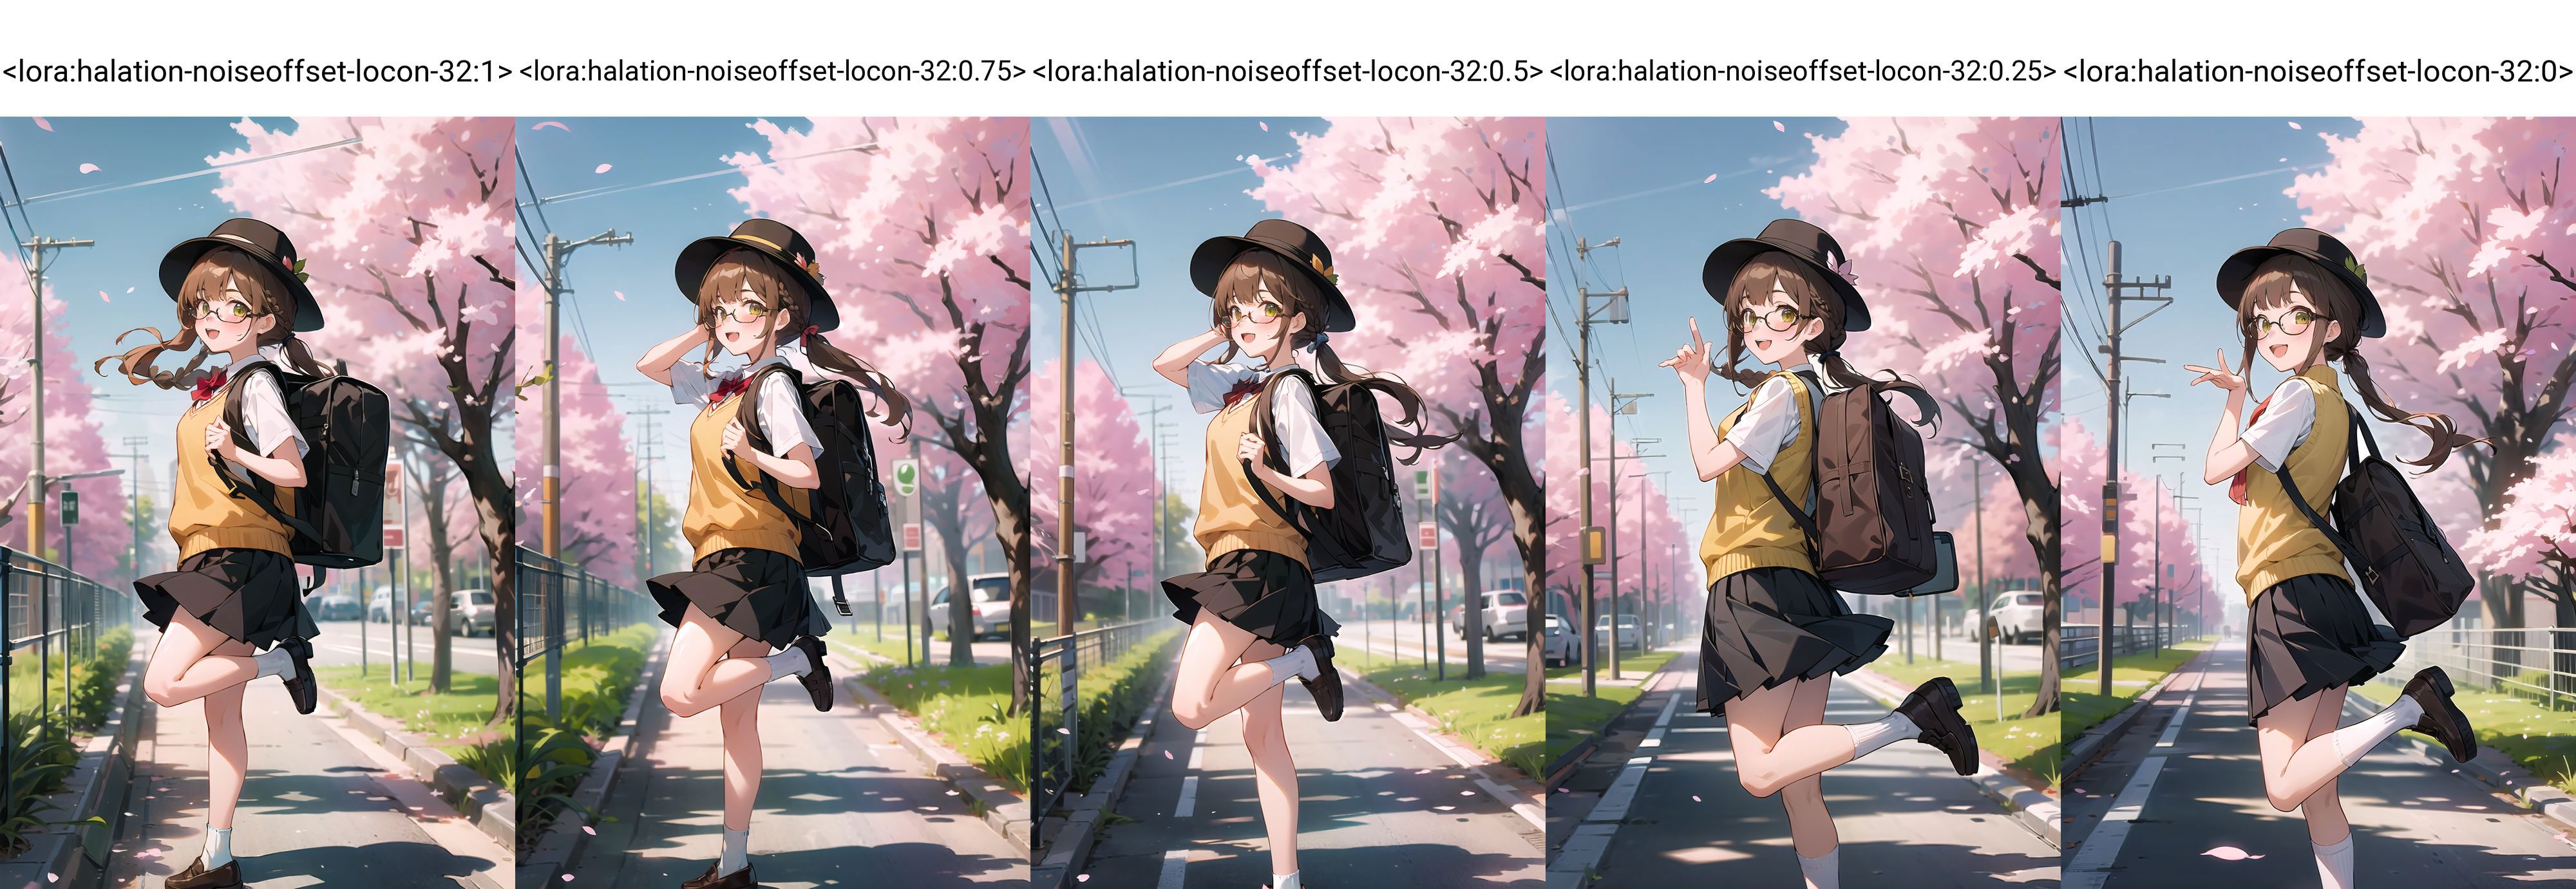 [Tool] Background halation/彩度優化器 Concept  image by L_A_X